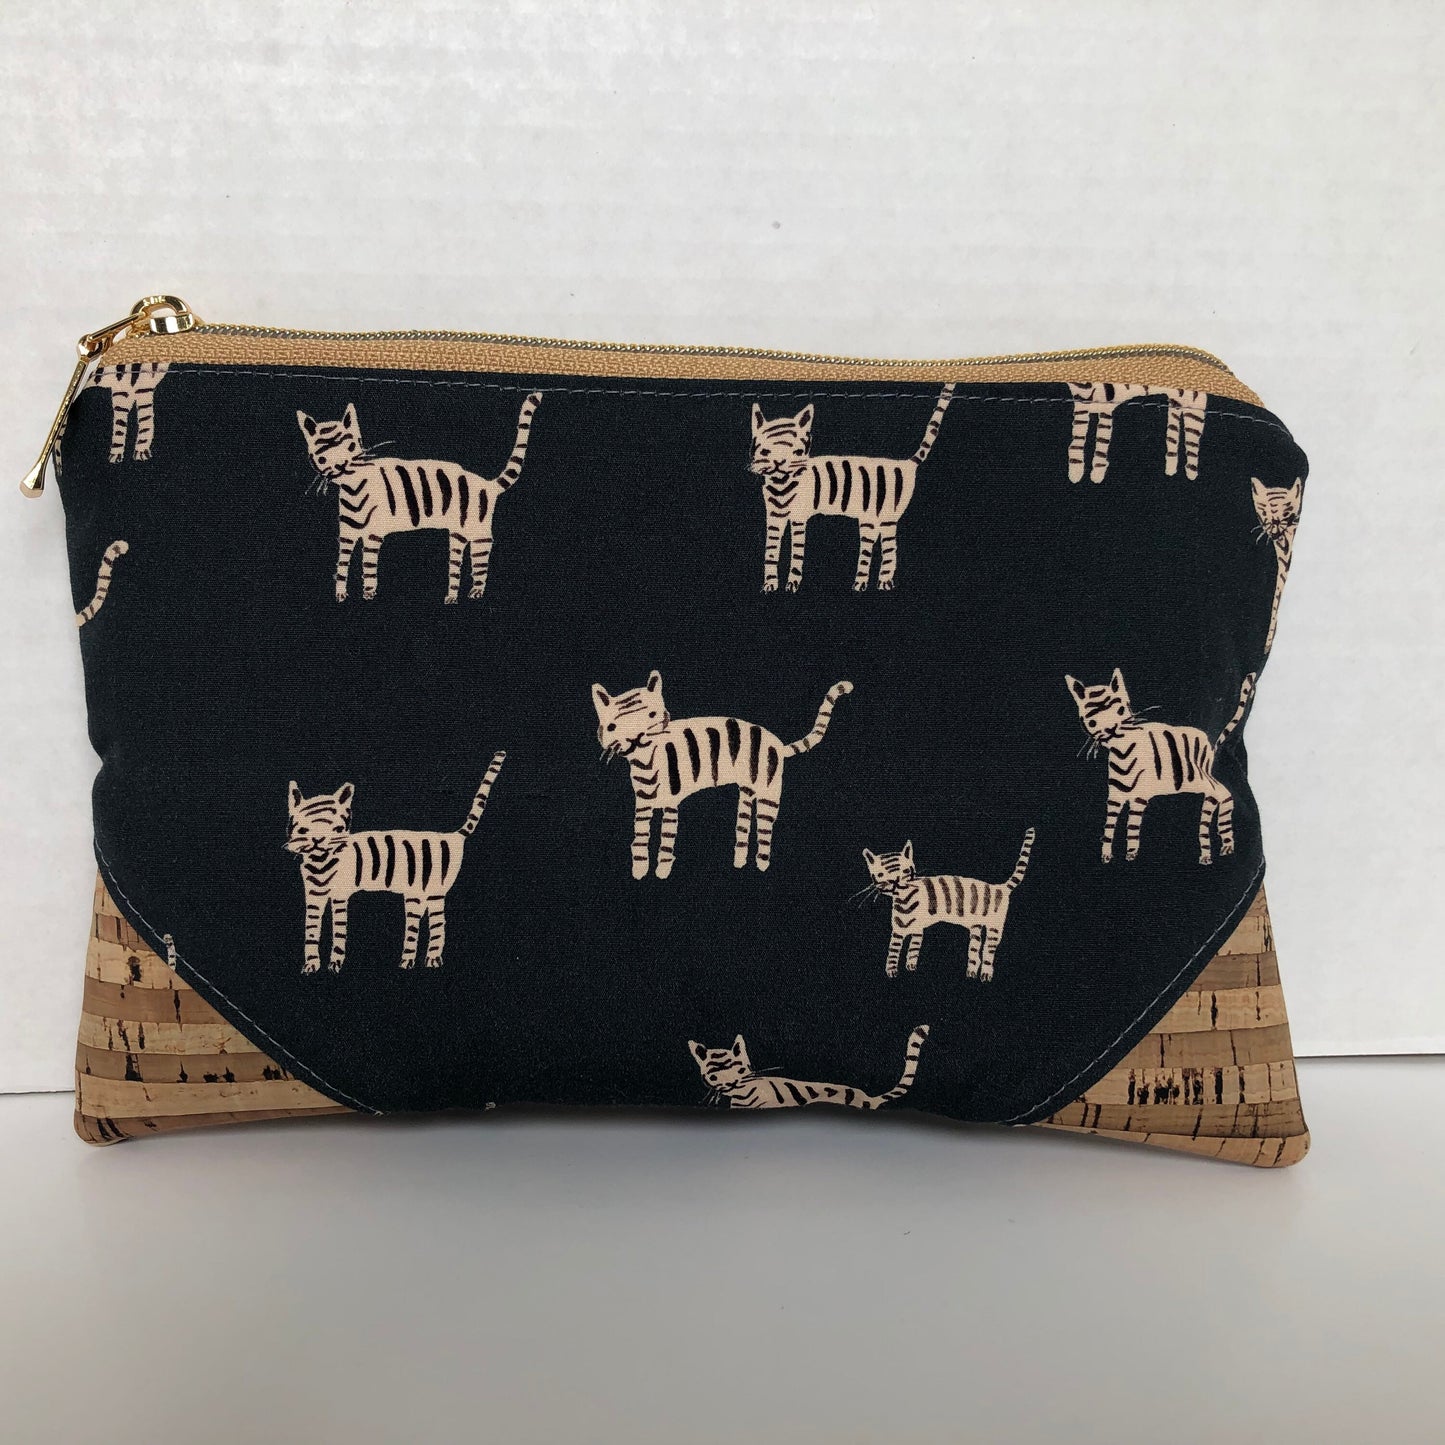 Cute Tigers Zipper Pouch with Cork Accents